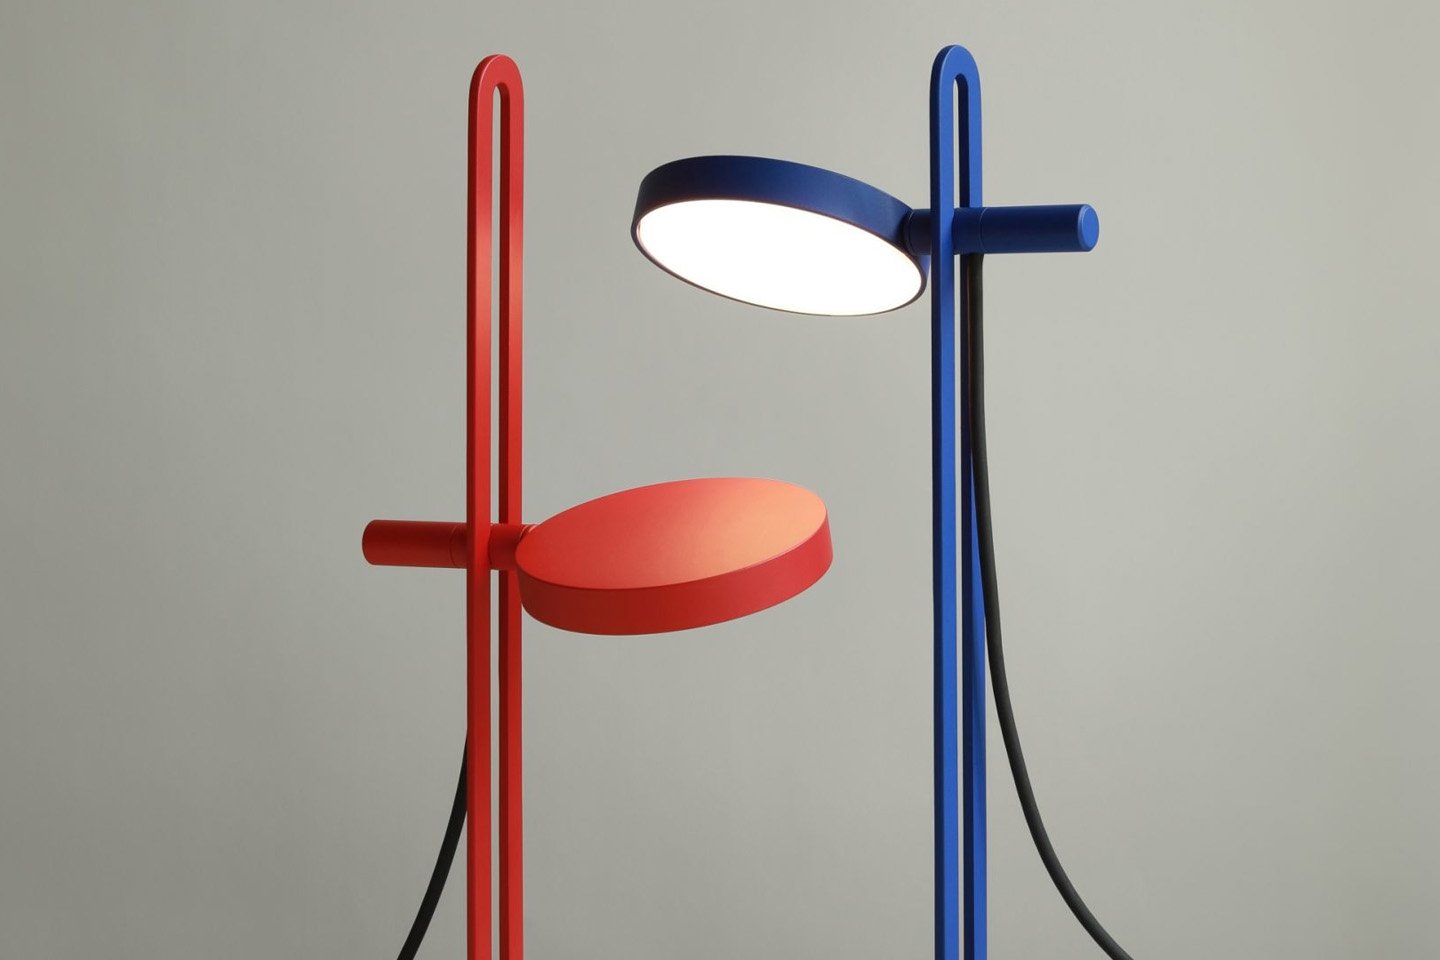 #Echo desk lamp is a minimal + functional lighting design inspired by the shape of a tuning fork